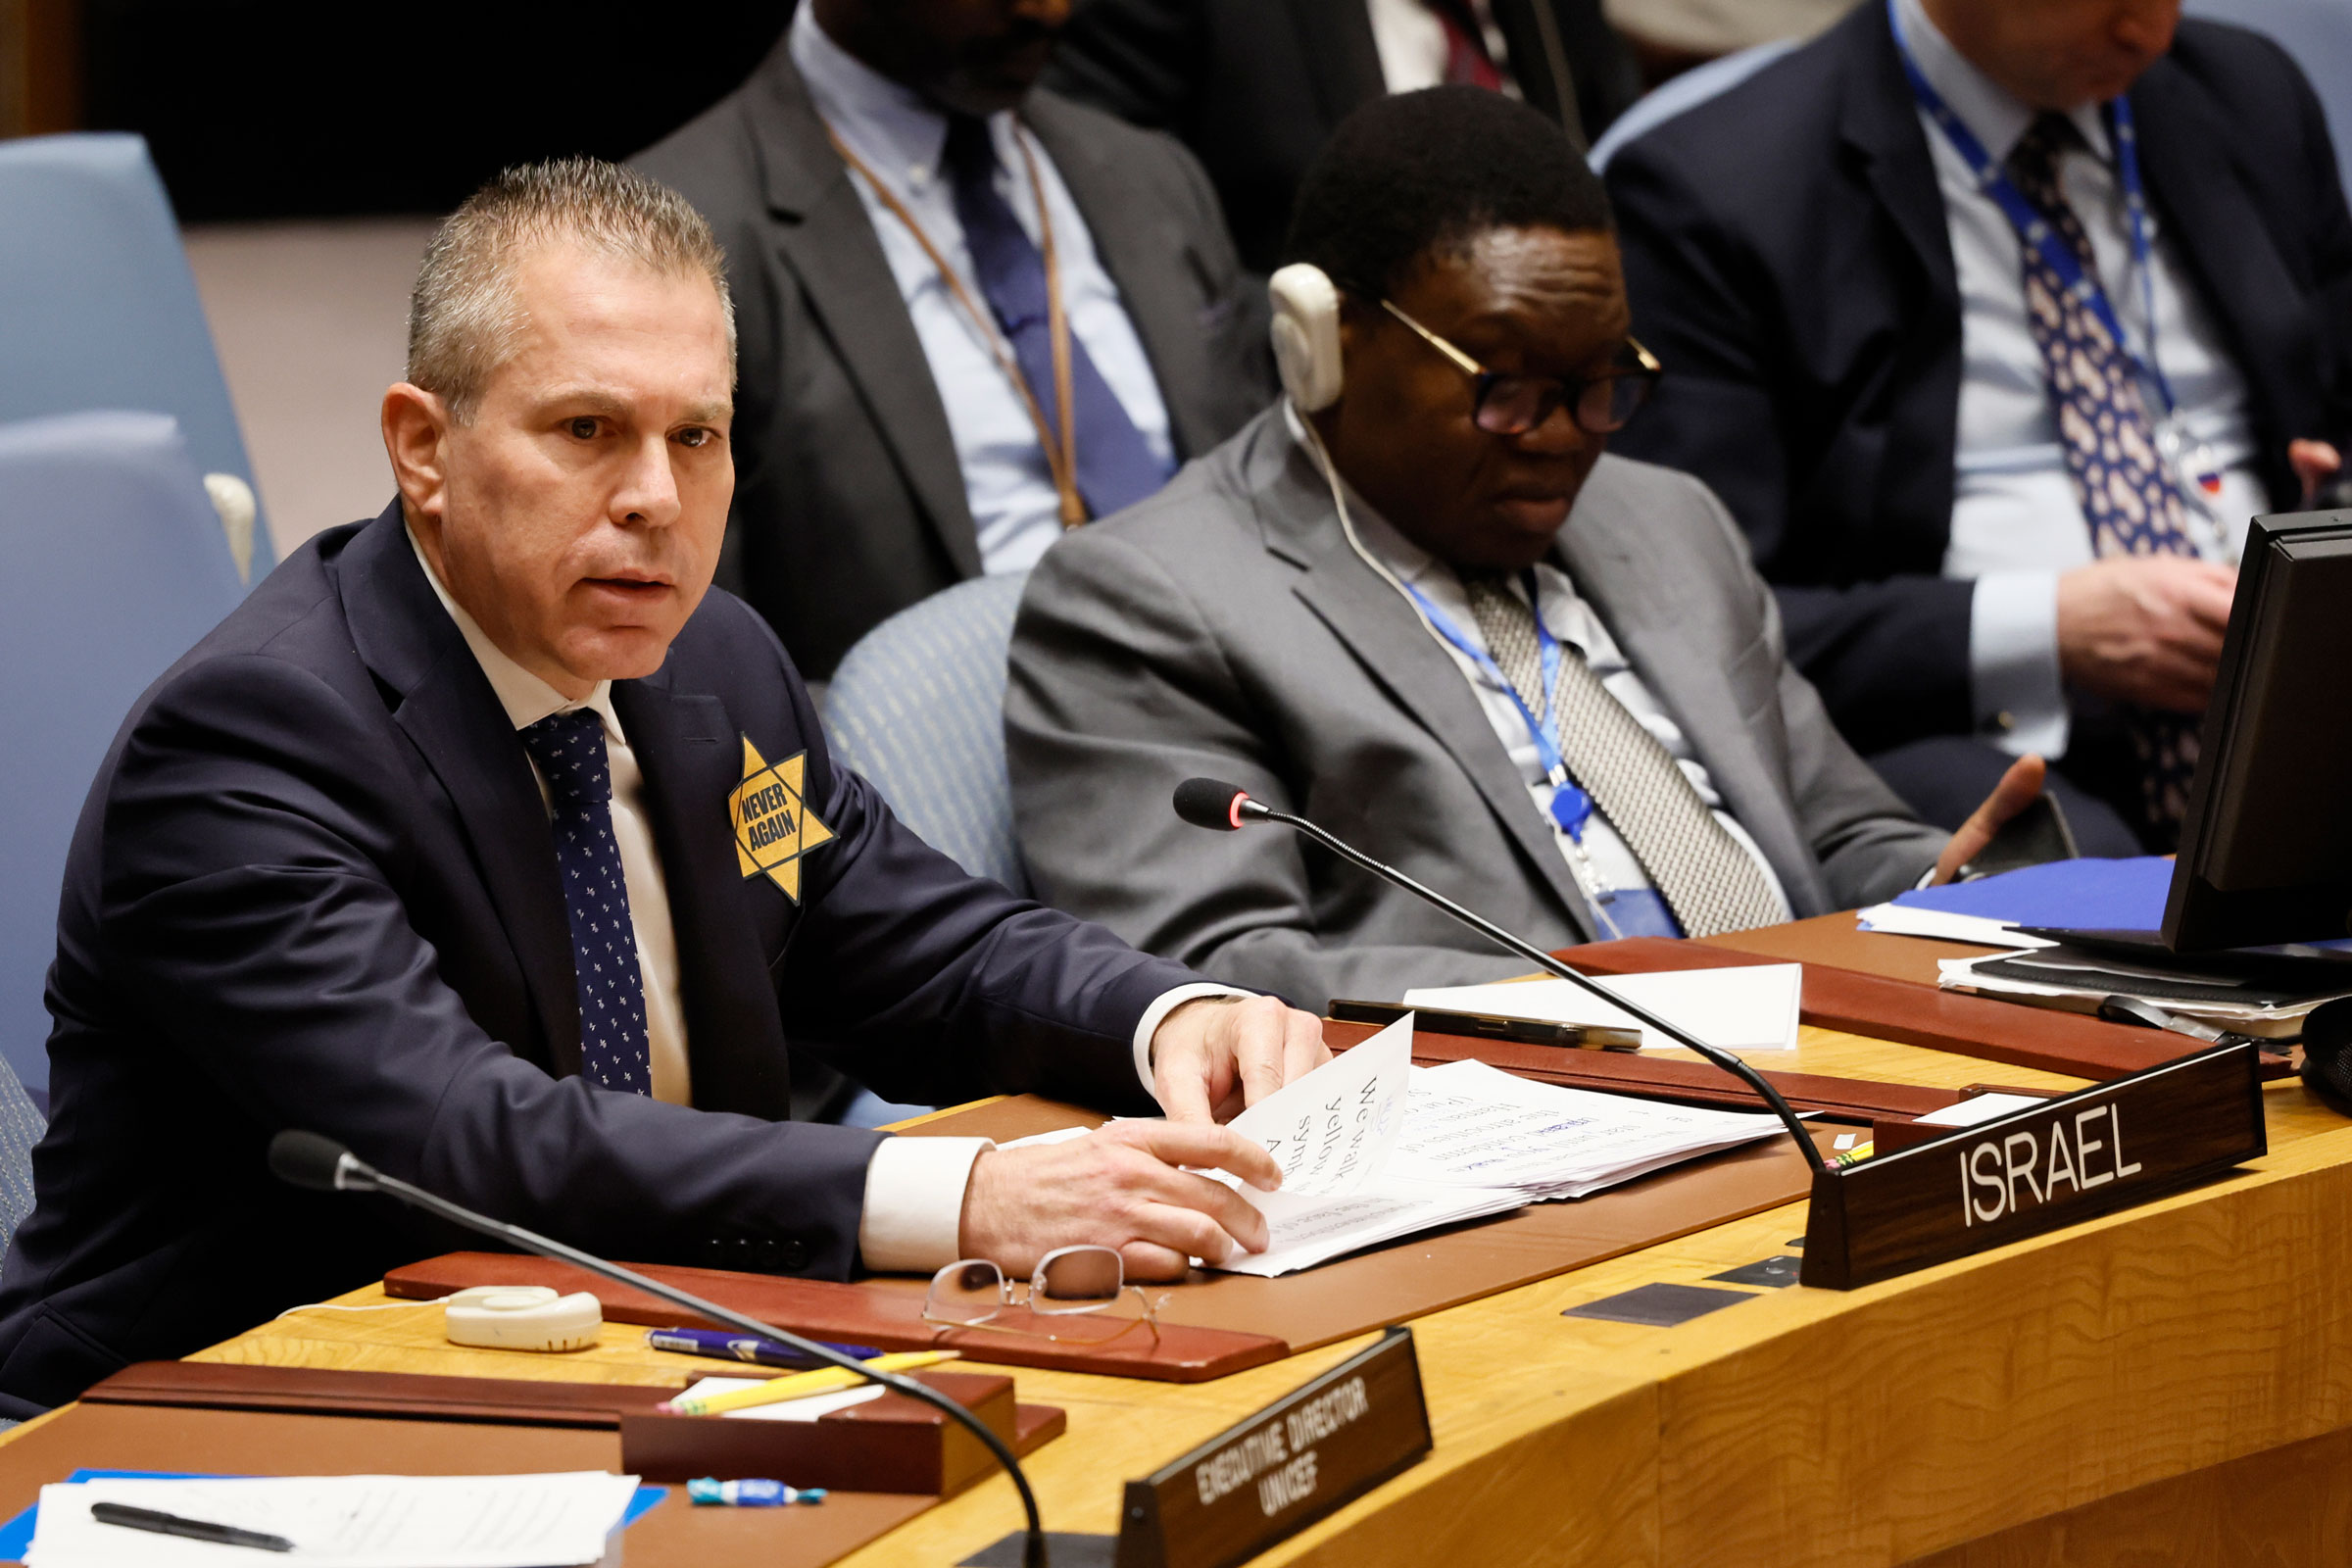 Israeli United Nations Ambassador Gilad Erdan, wearing a yellow star with the words “Never Again,” speaks during a Security Council meeting on the Israel-Hamas war at U.N. headquarters